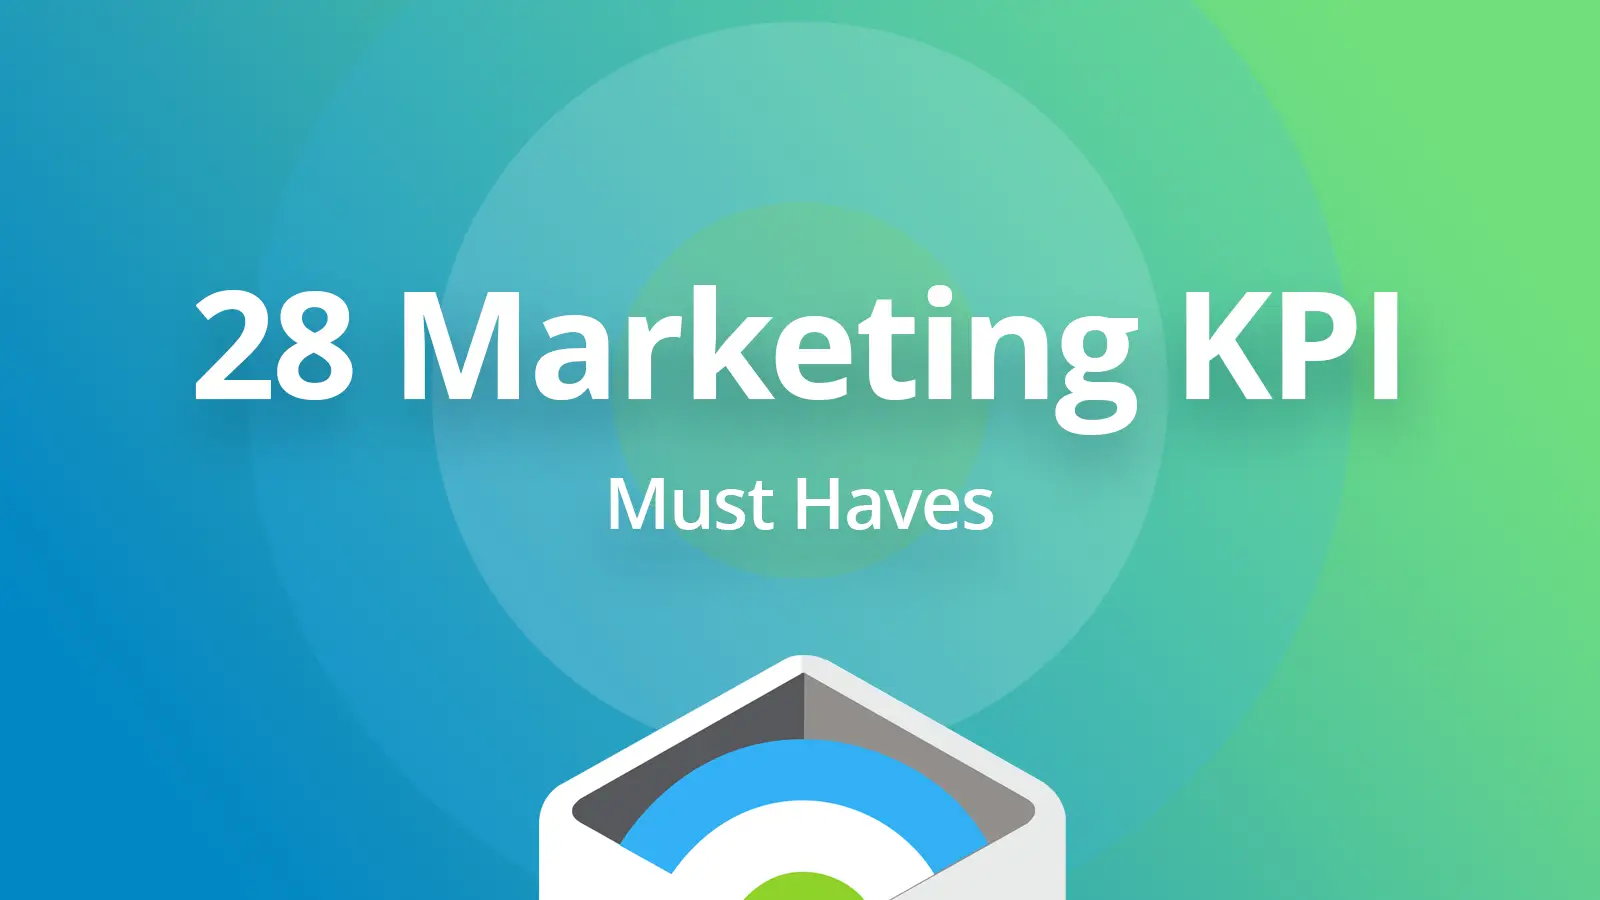 18 Marketing KPIs in white copy on blue background